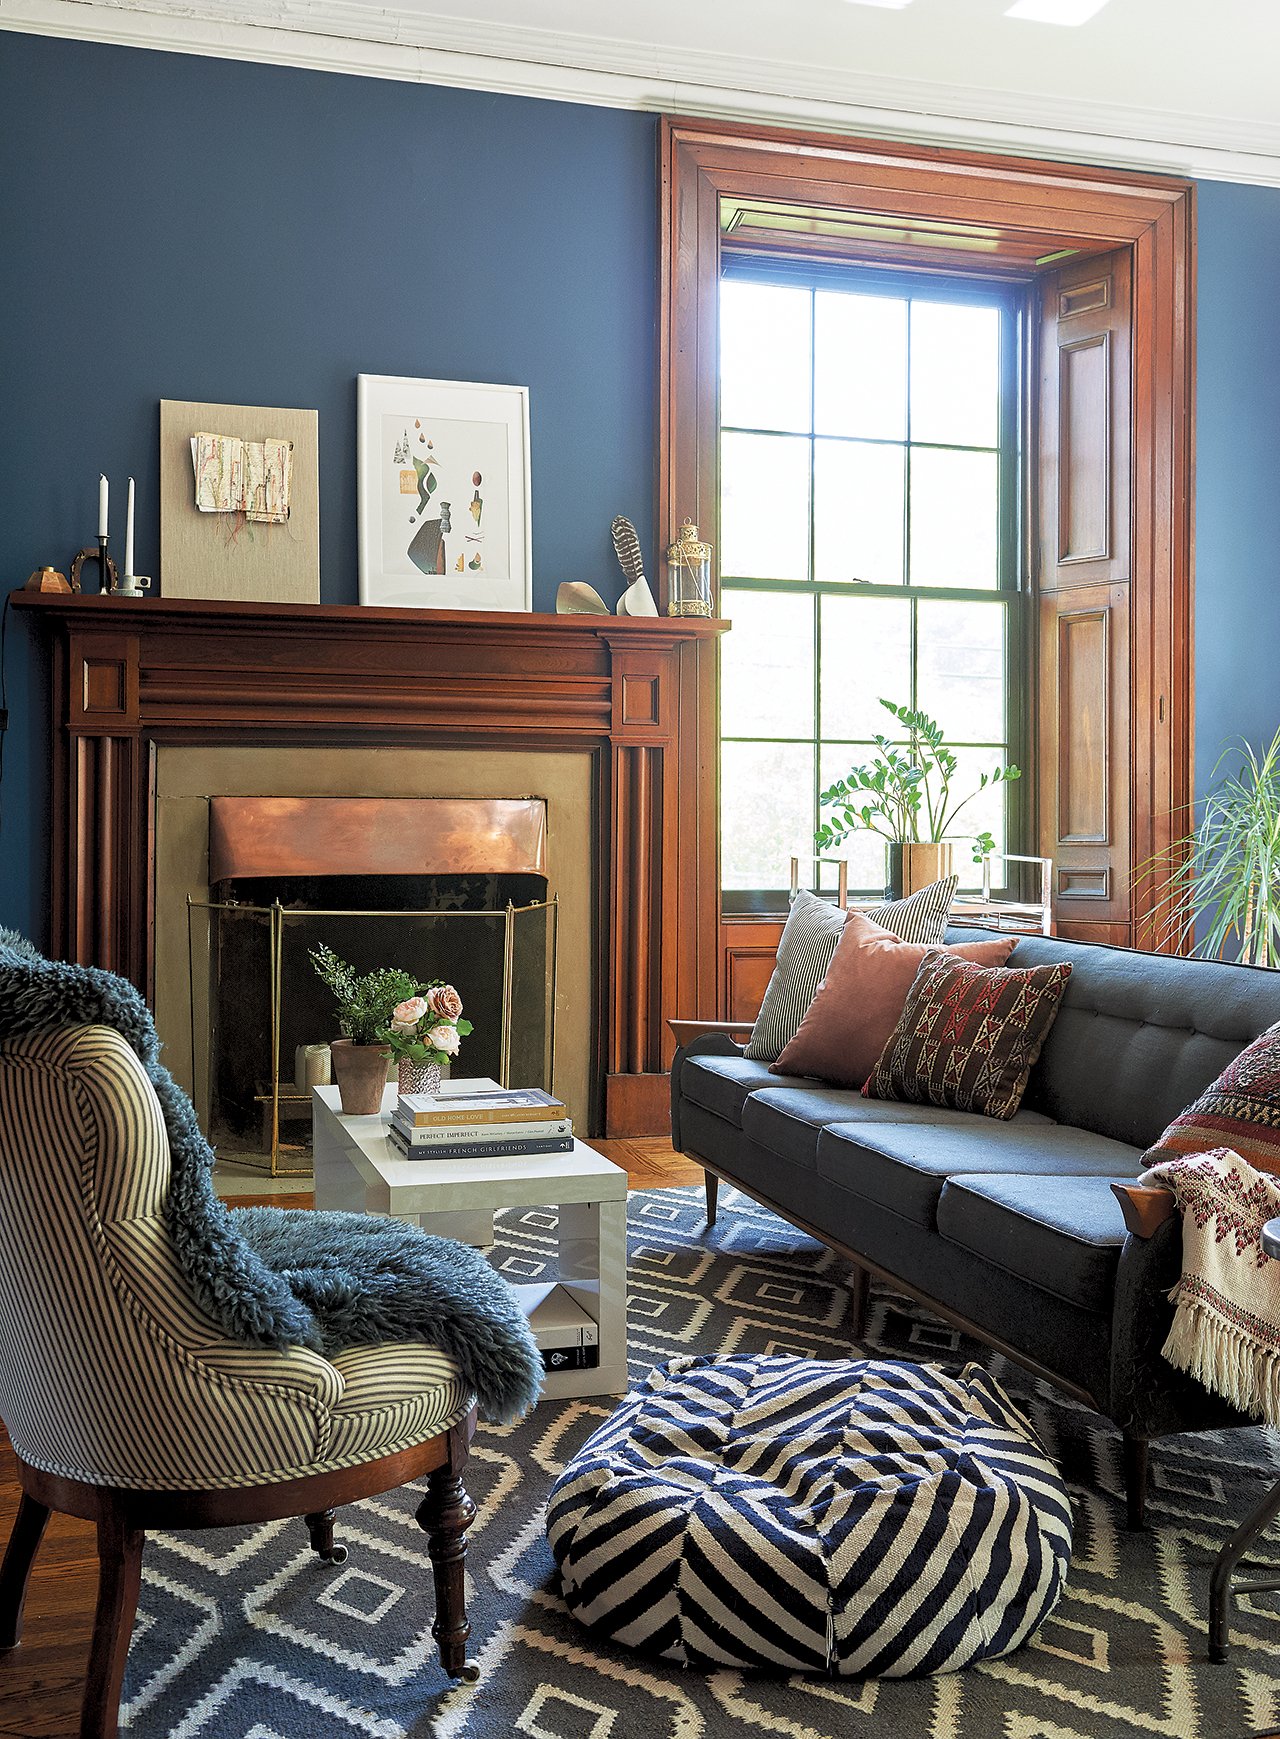 The sitting room of the stone house is warm and comfortable yet modern and chic, with cool paint tones, warm wood, comfy chairs, and throw cushions and pillows.